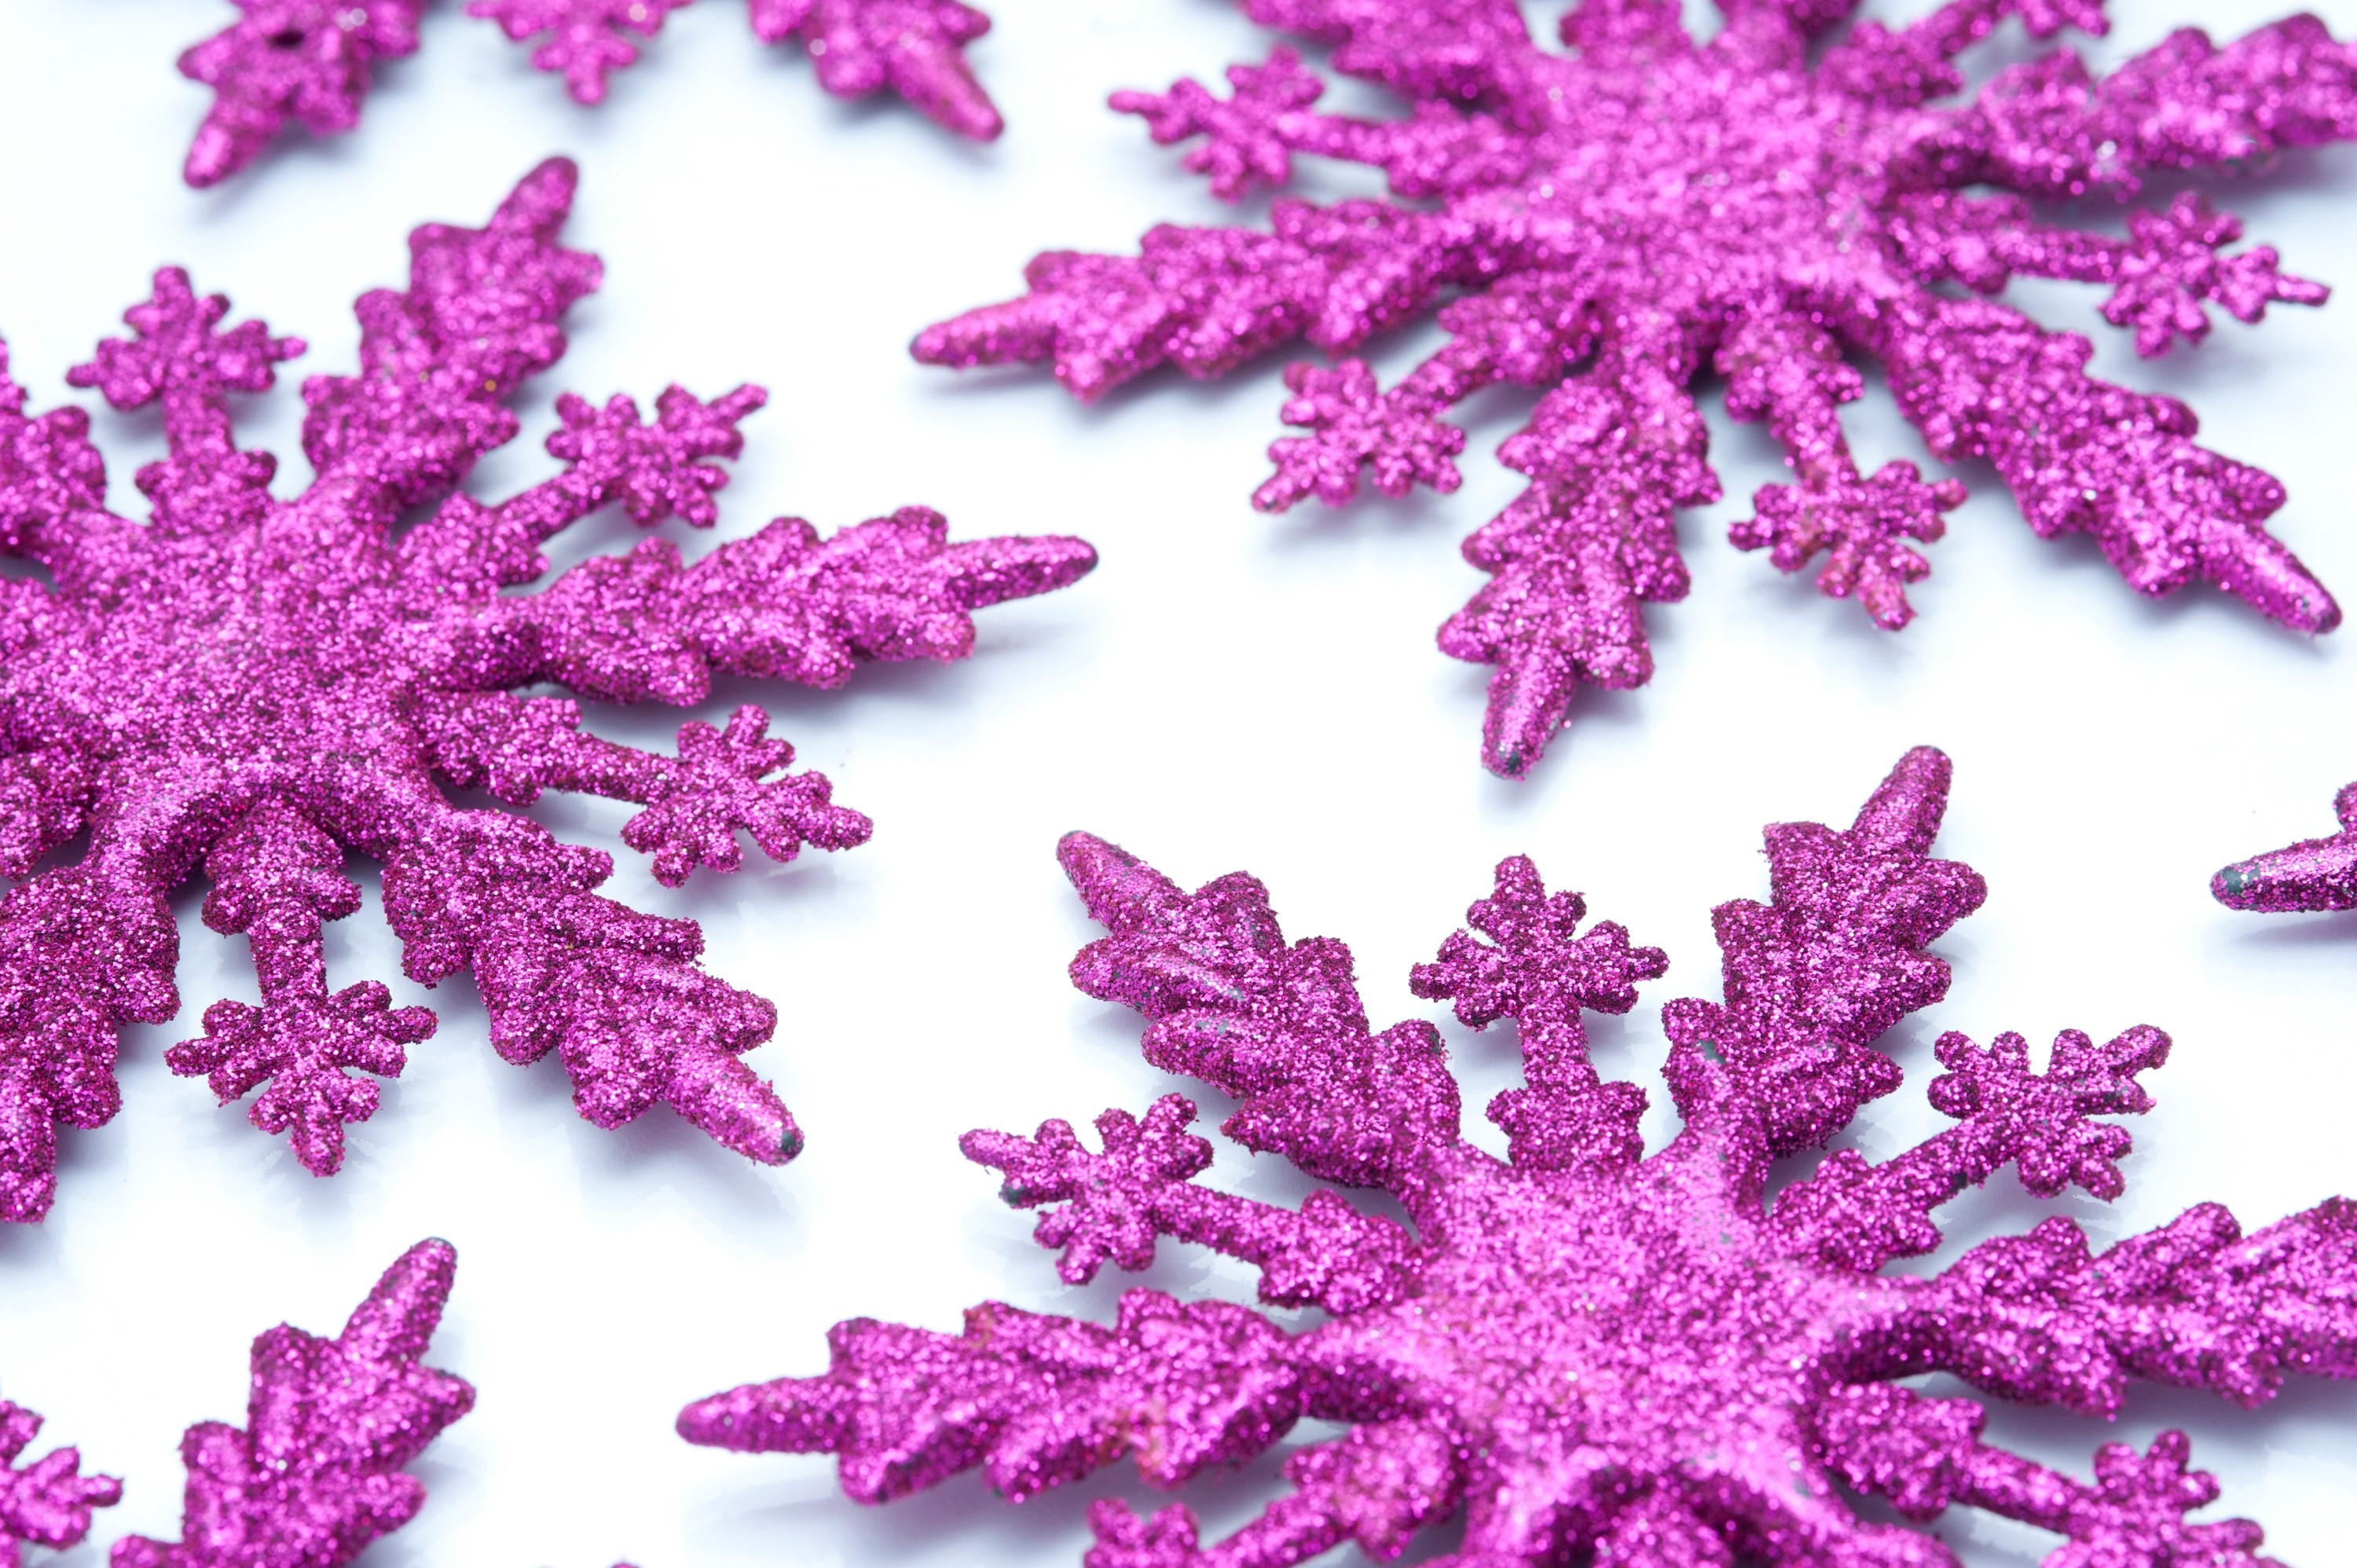 Pink Snowflake Christmas Ornament – See more similiar images at backgroundimages